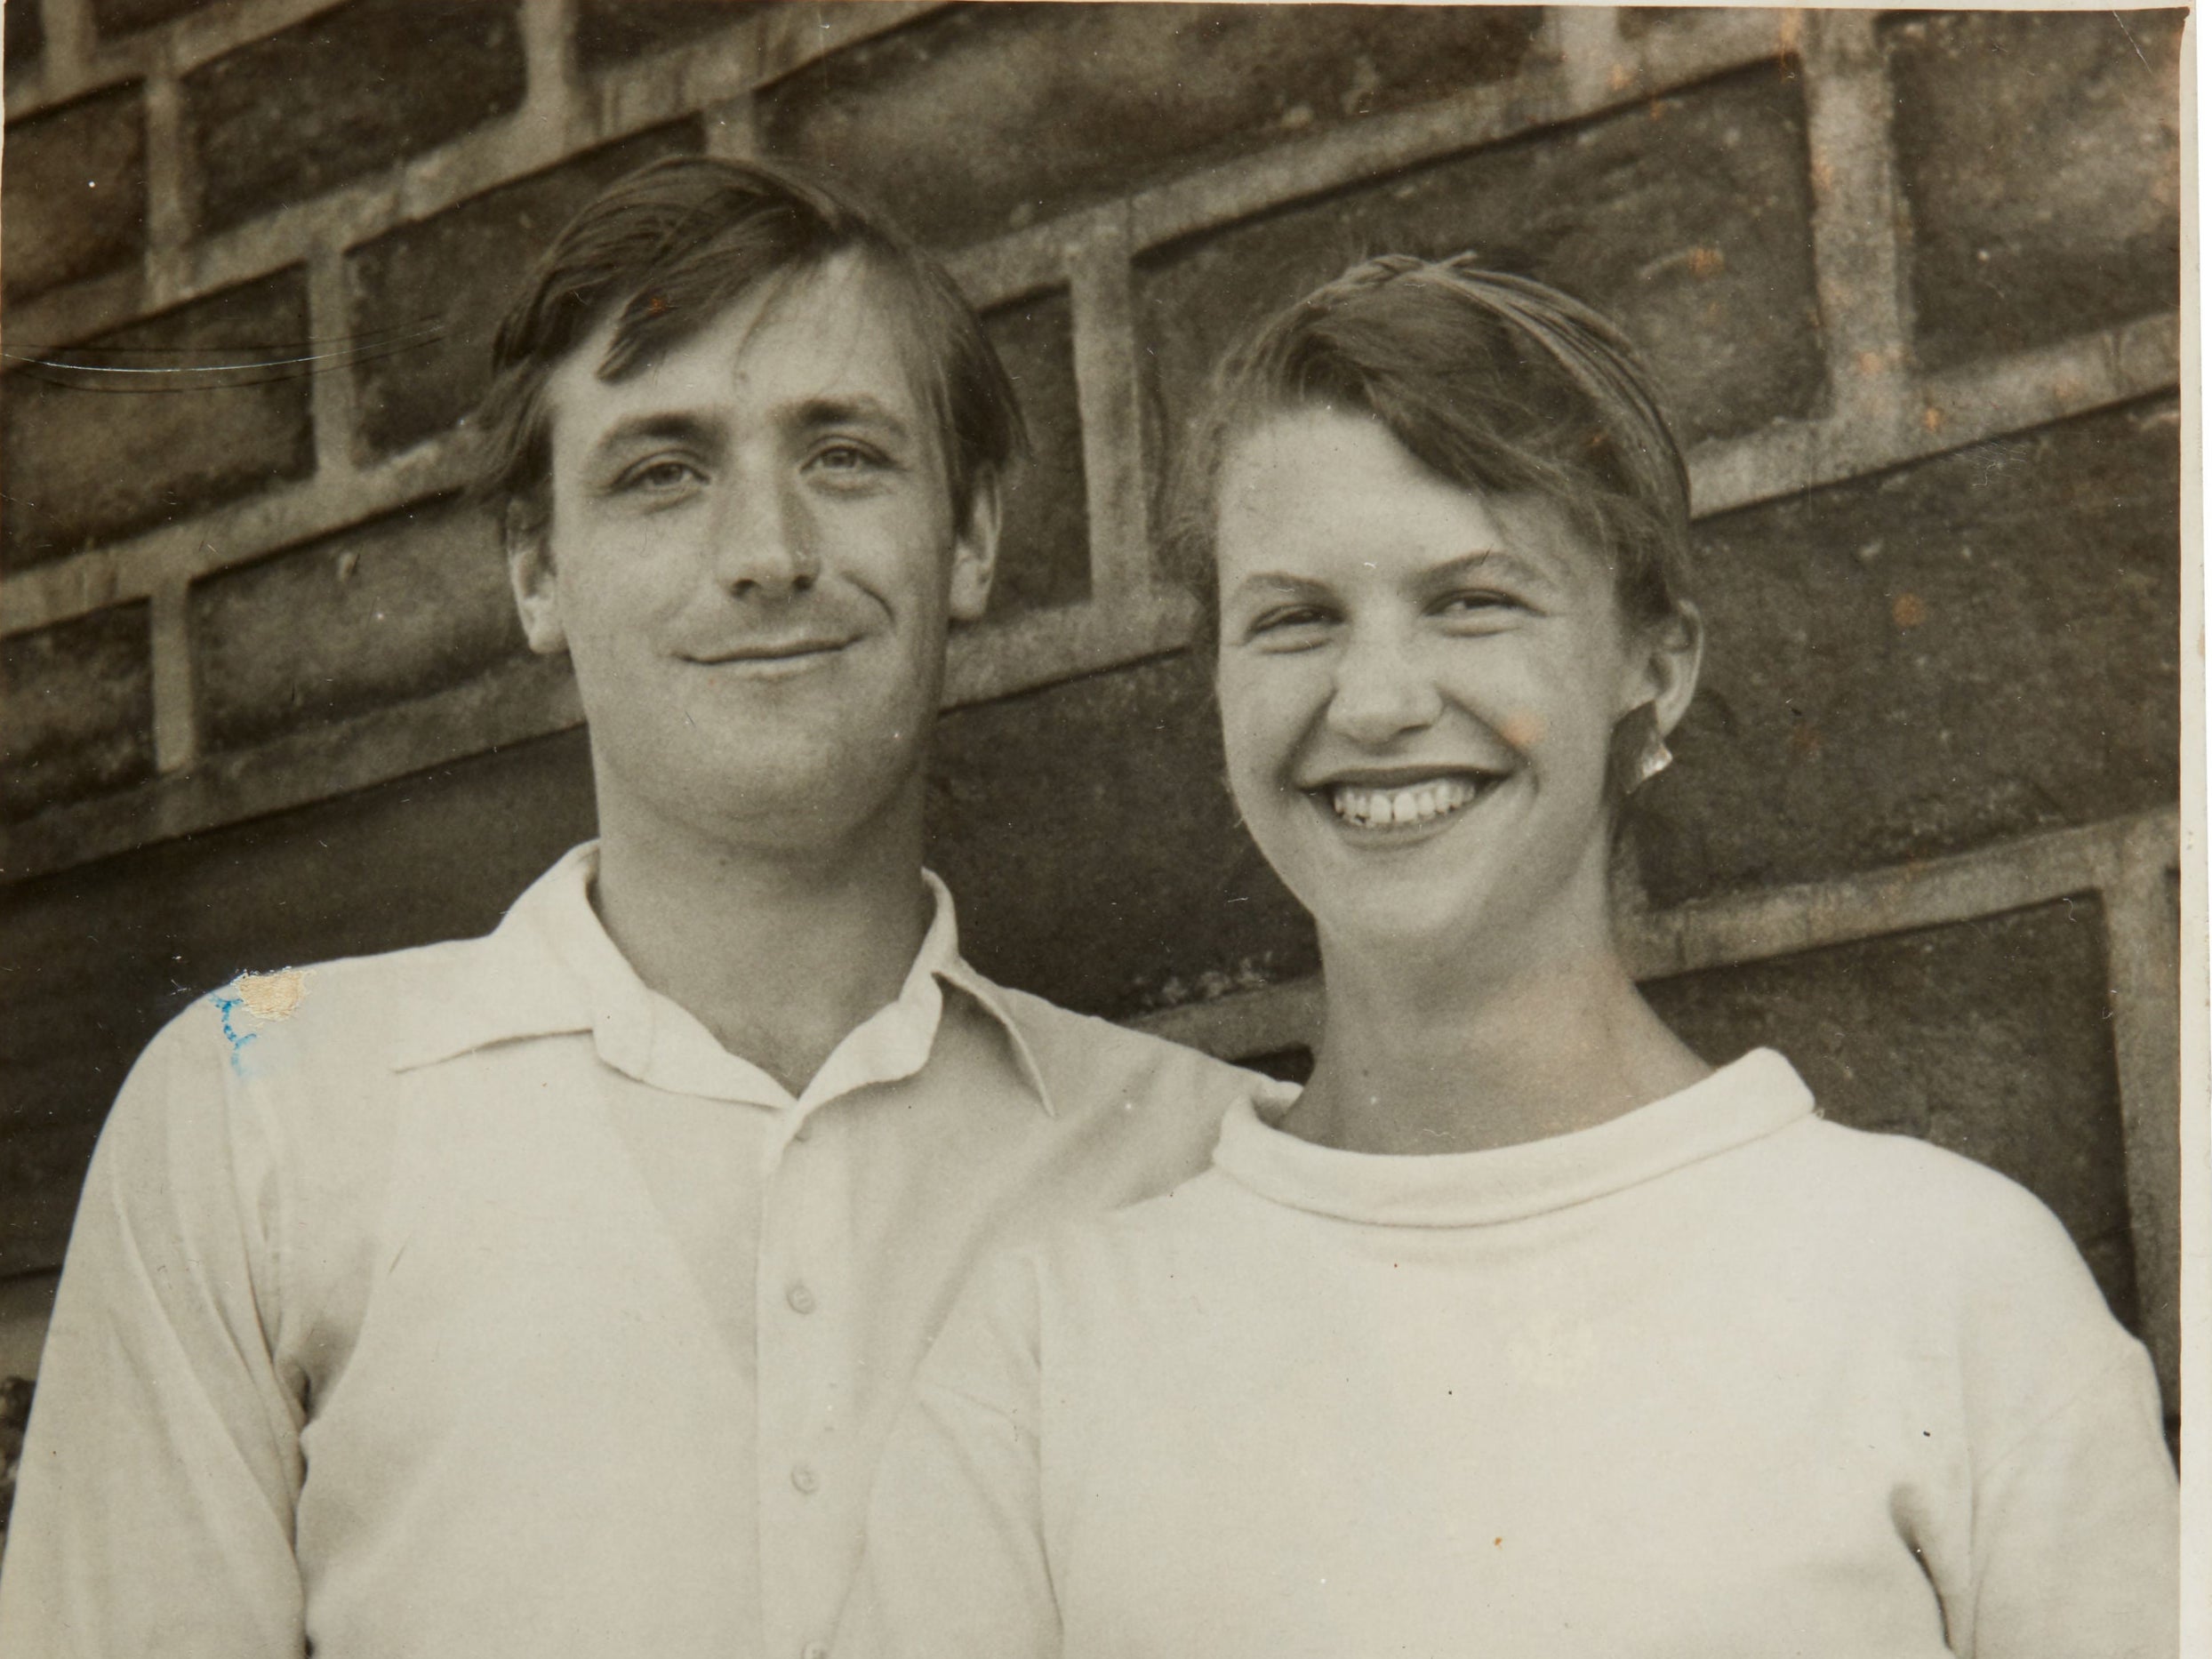 Sylvia Plath's passionate notes to Ted Hughes up for auction